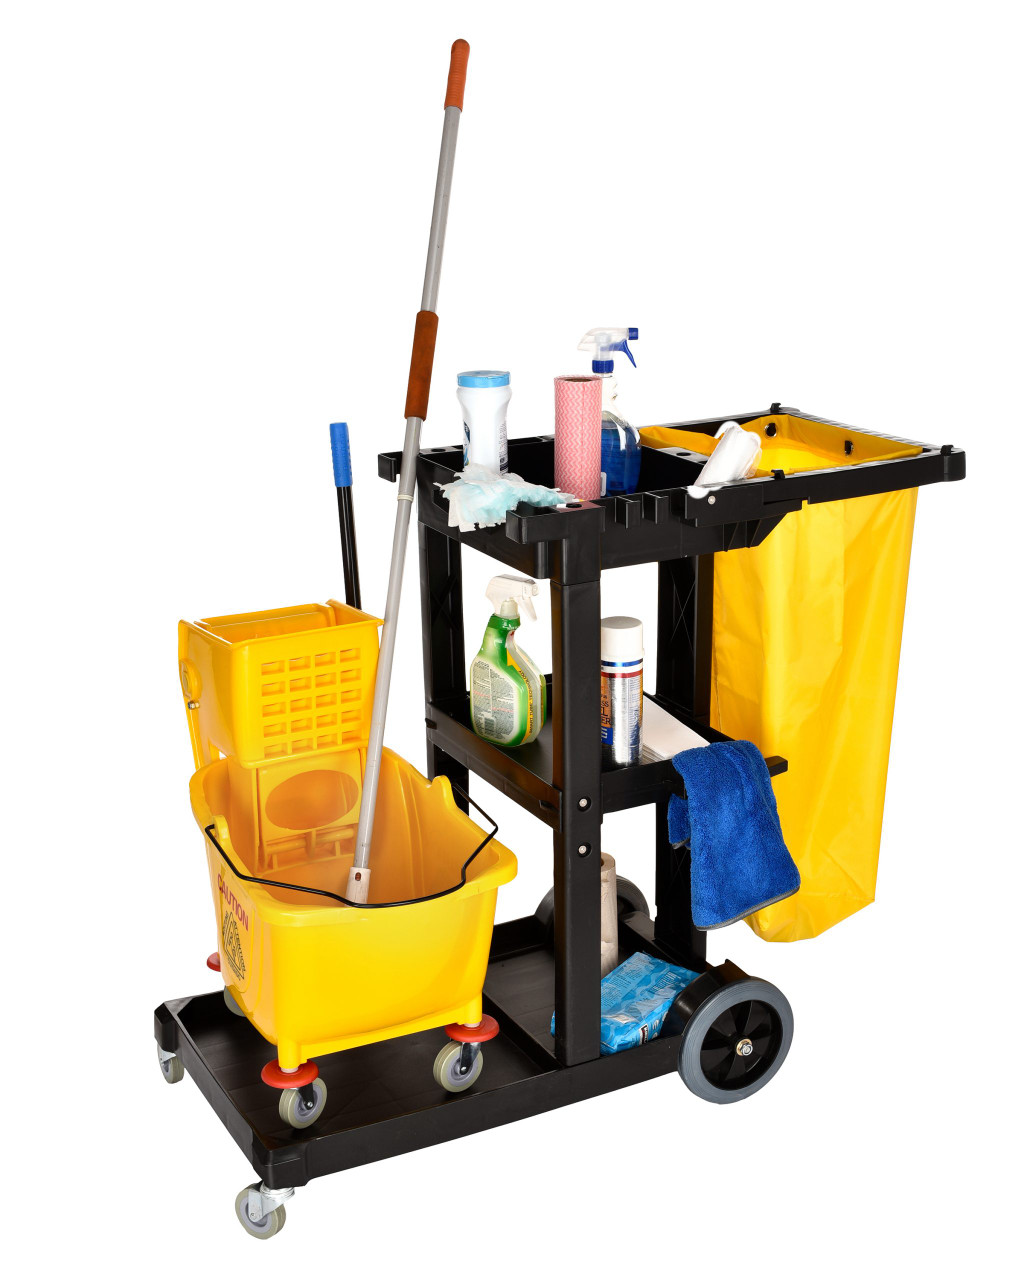 JANITORIAL CLEANING CART WITH 3 SHELVES